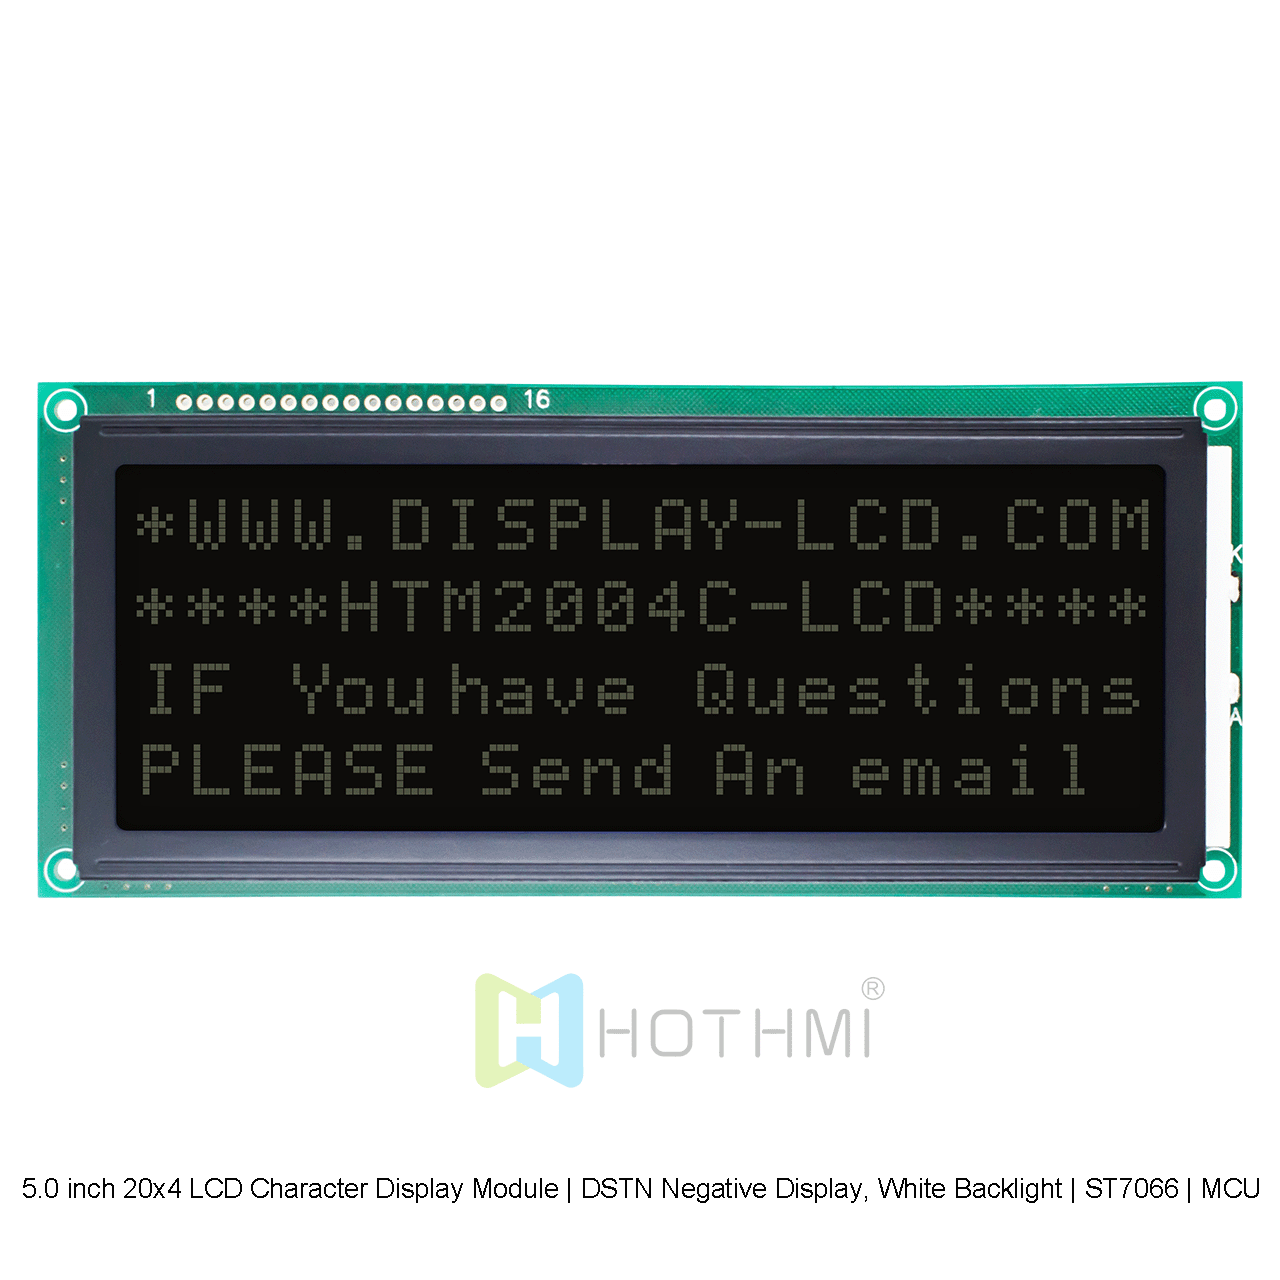 5.0 inch 20x4 LCD Character Display Module | DSTN Negative Display, White Backlight | ST7066 | MCU Interface | Black Background with White Characters Arduino